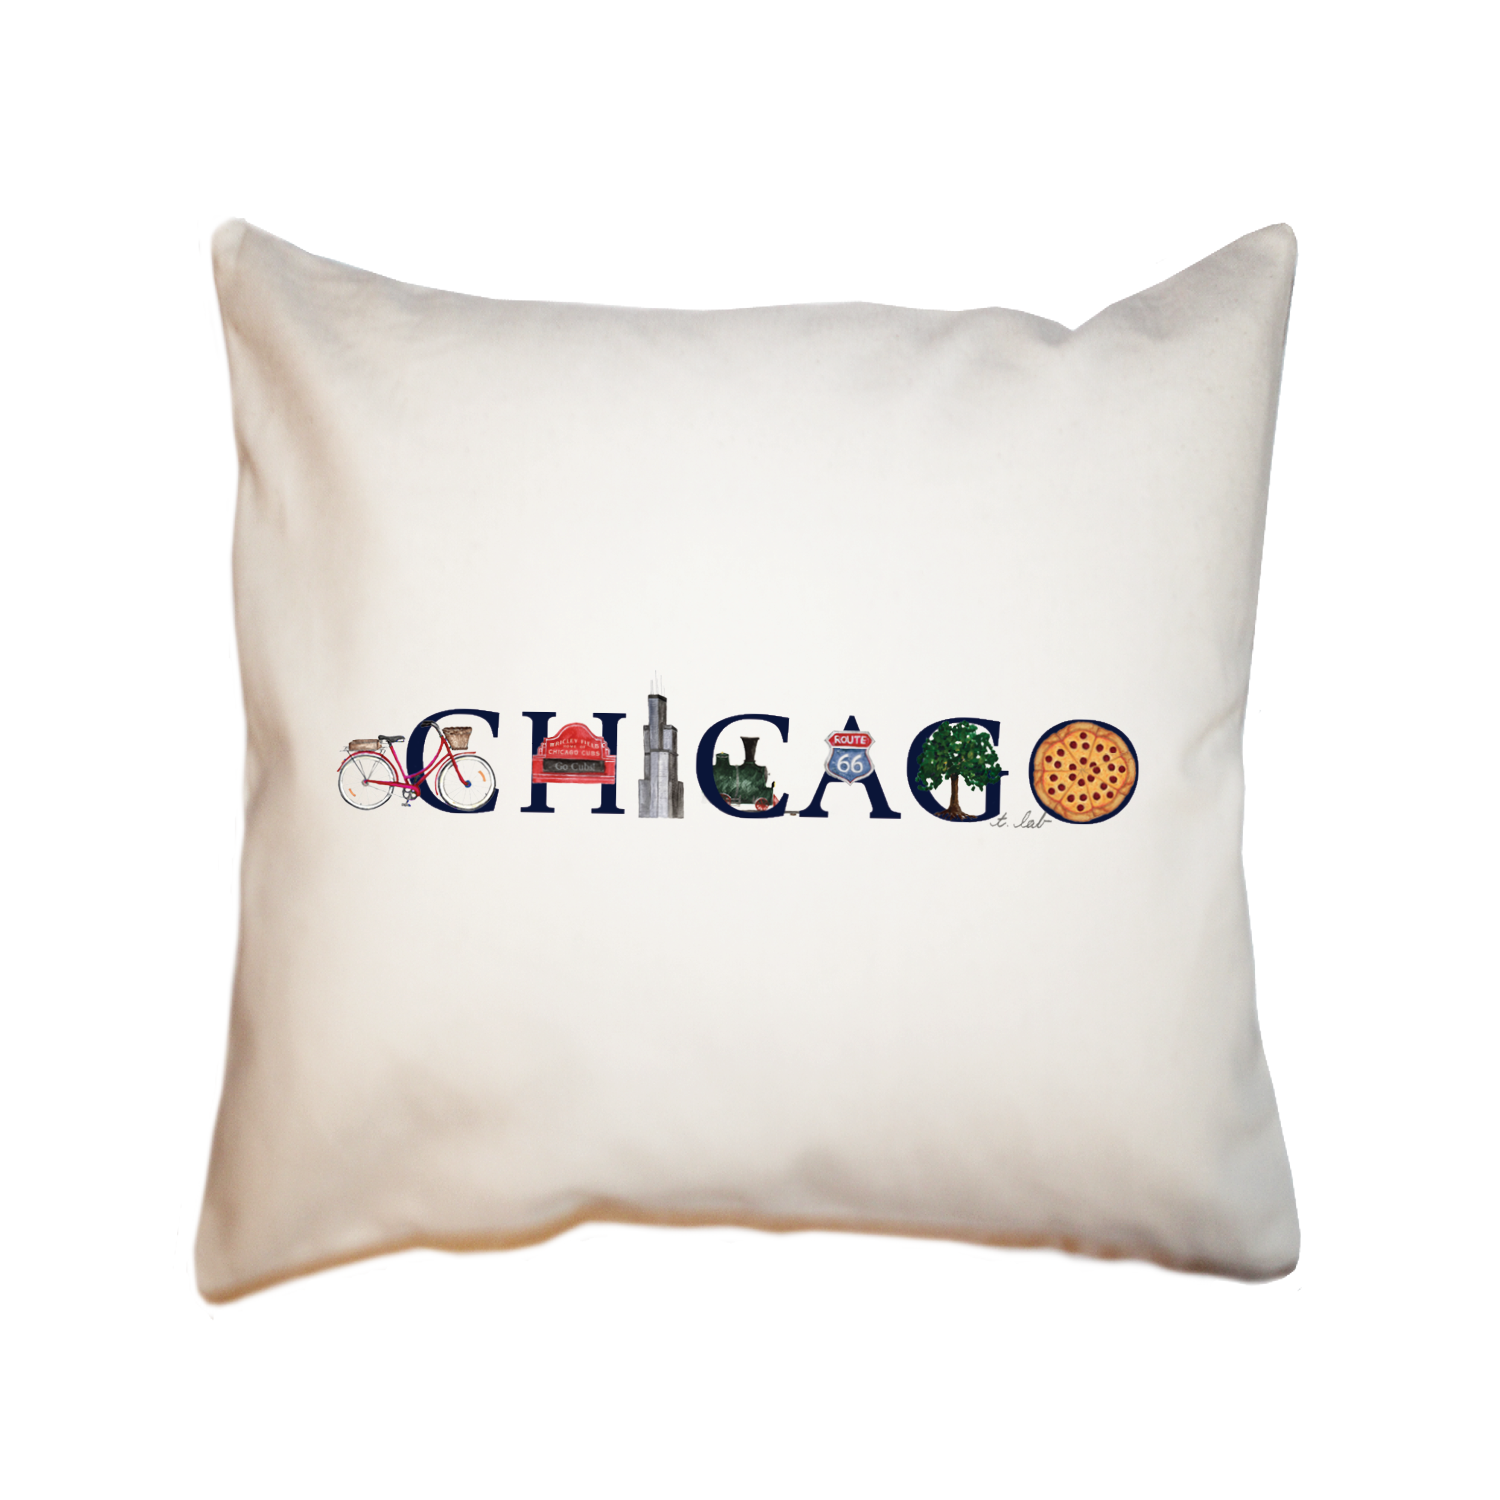 chicago square pillow